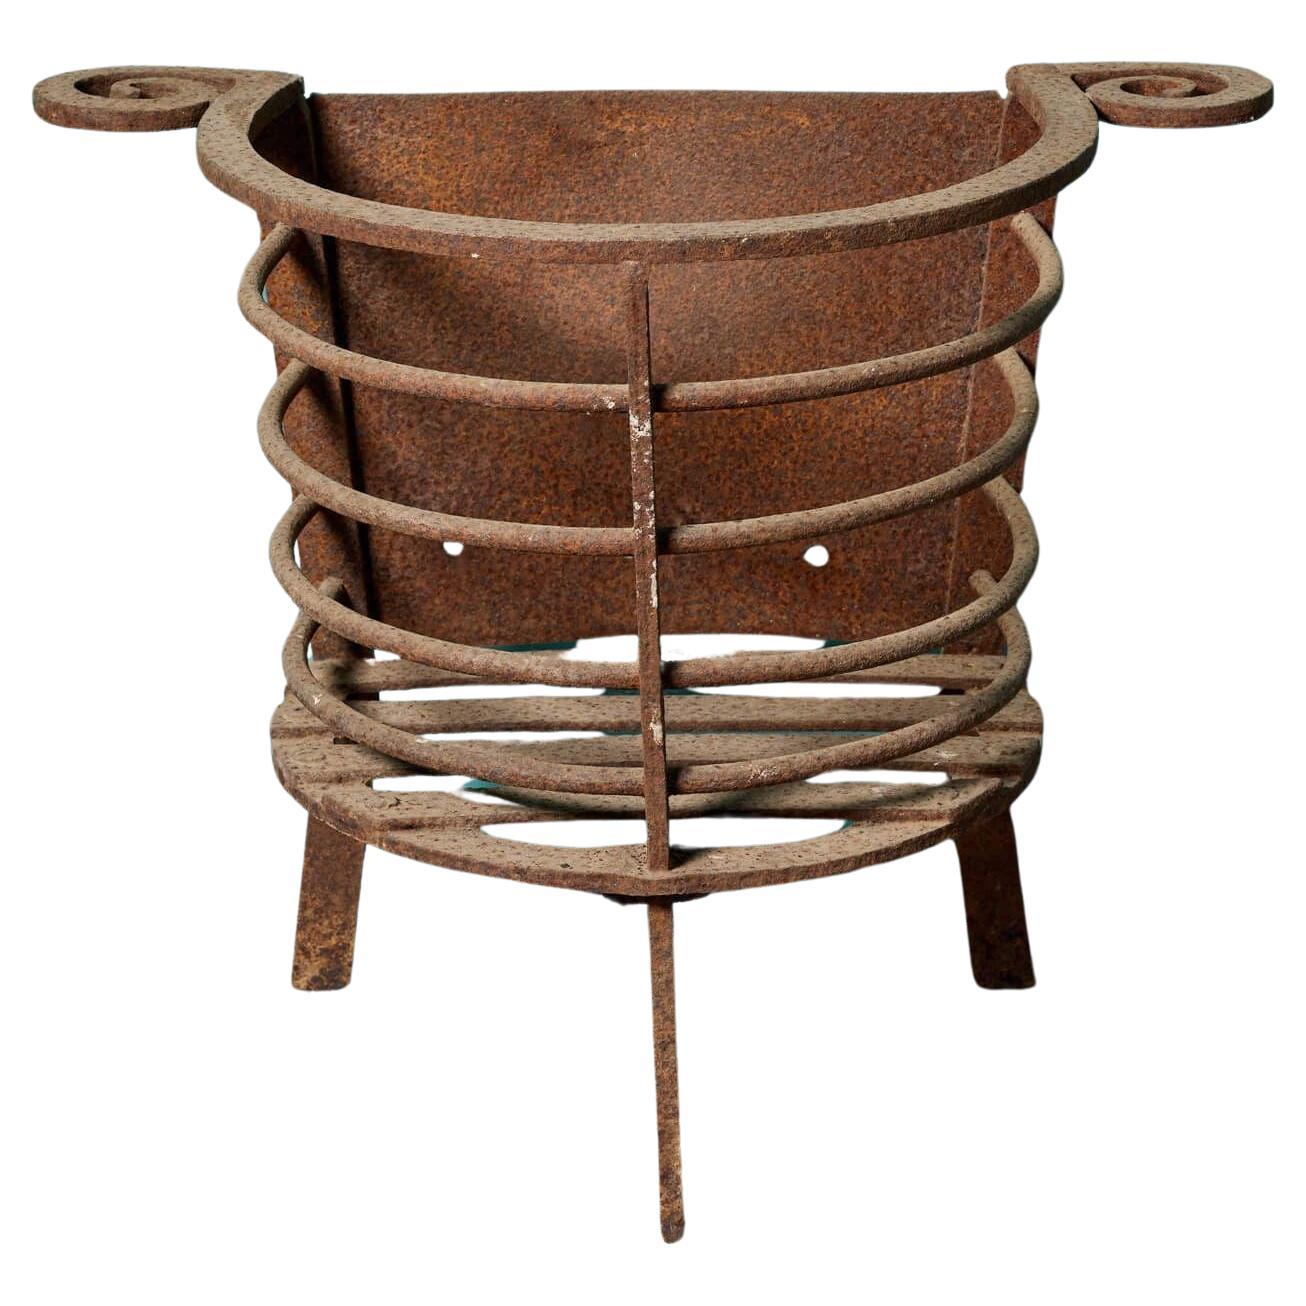 Antique Wrought Iron Fire Basket For Sale